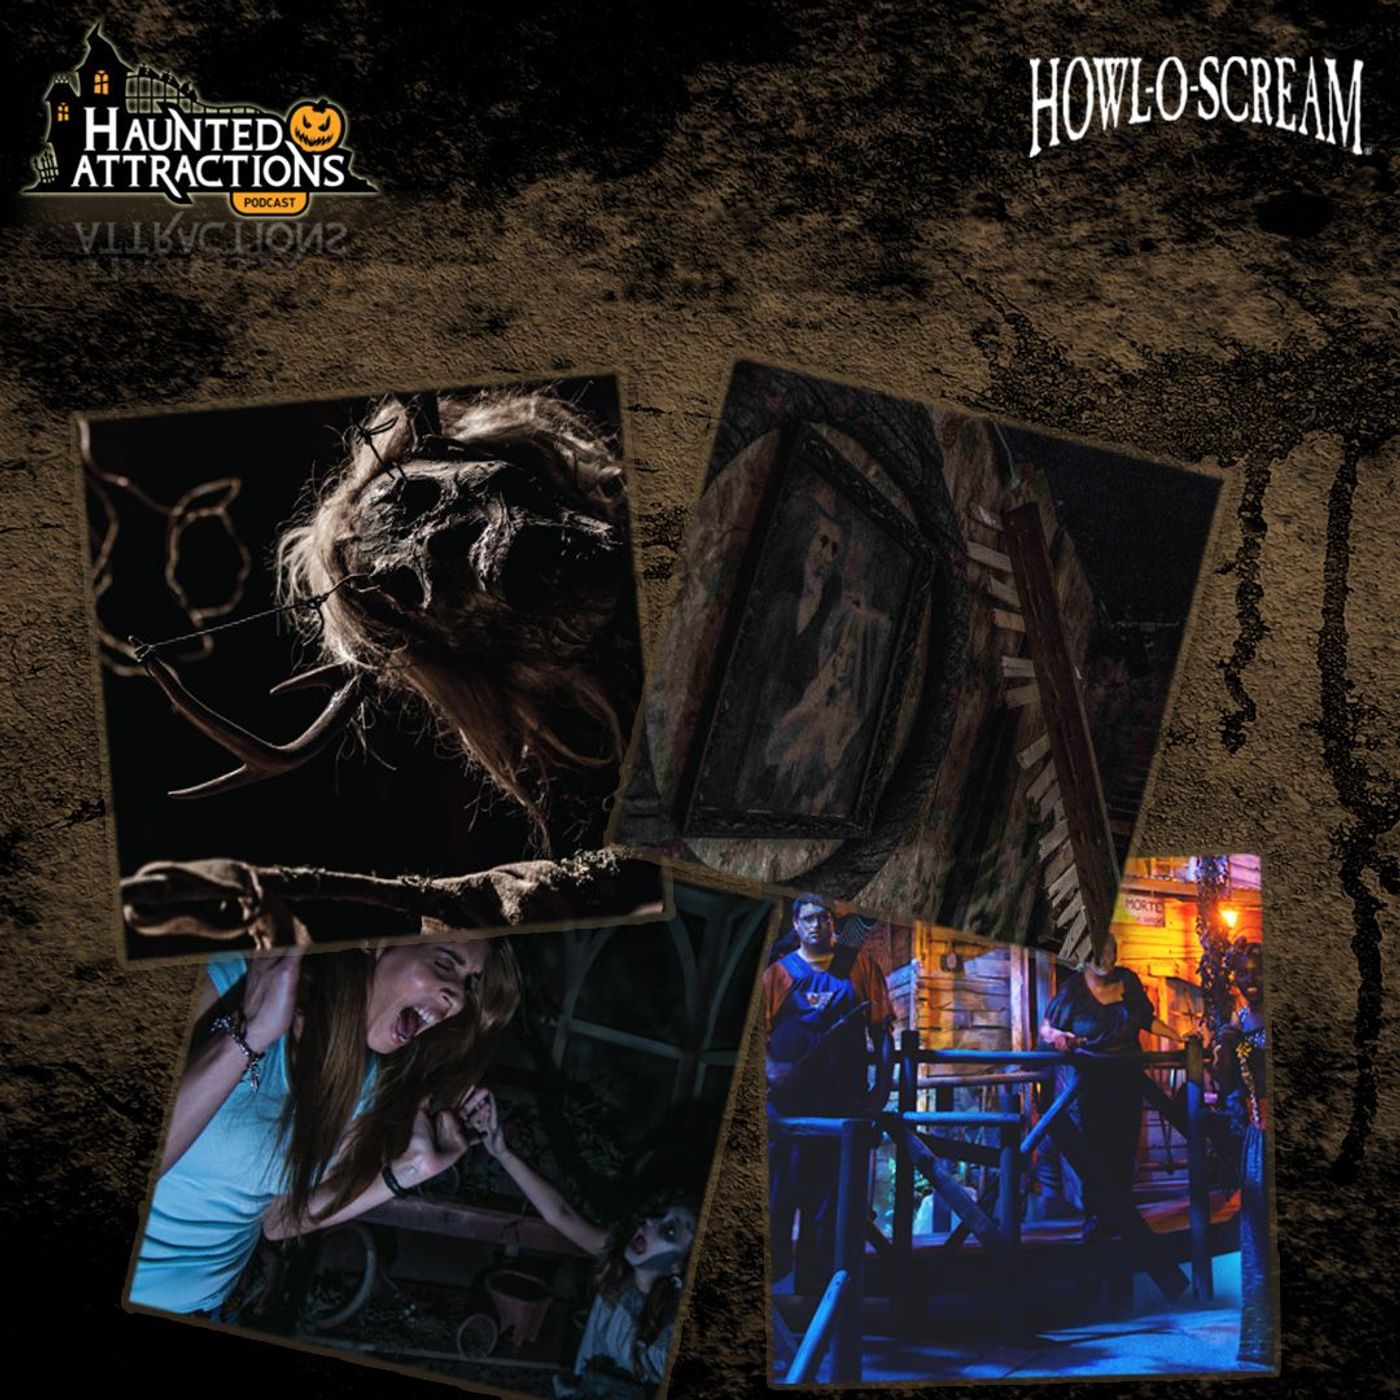 Howl-O-Scream celebrates their 16th year with Unearthed: Scarlett’s Revenge